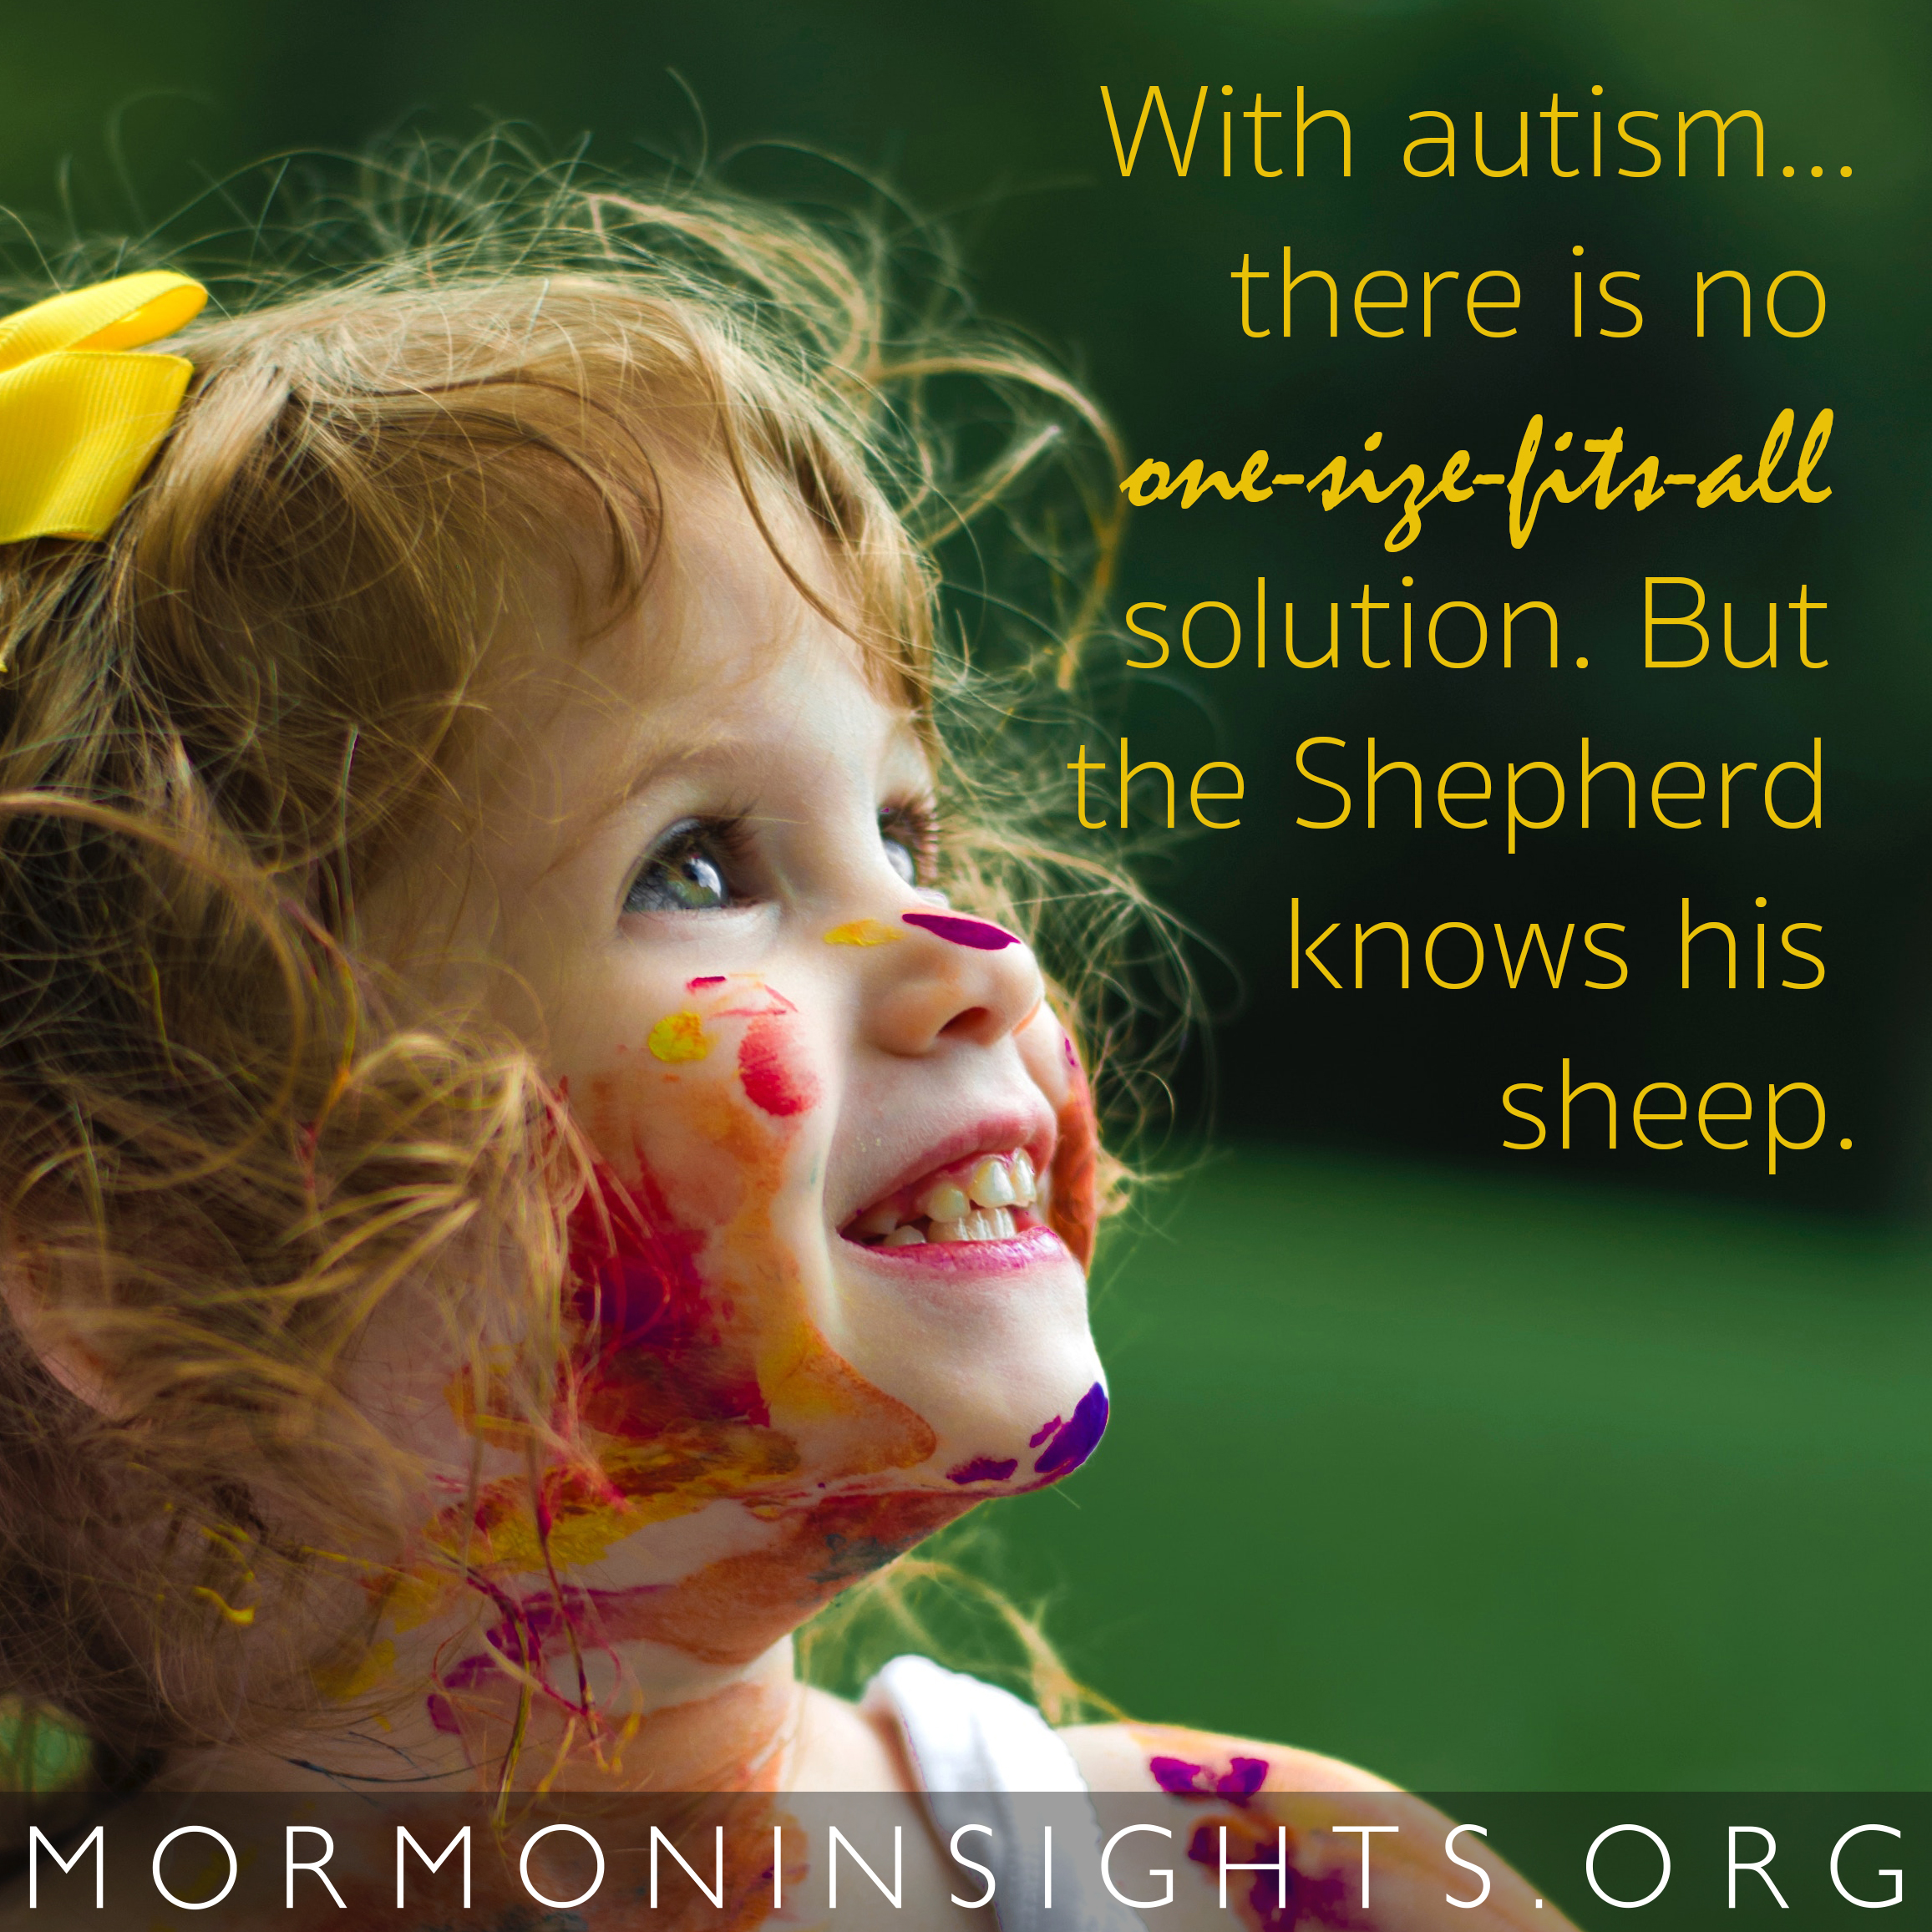 "With autism there is no one-size-fits-all solution. But the Shepherd knows his sheep"